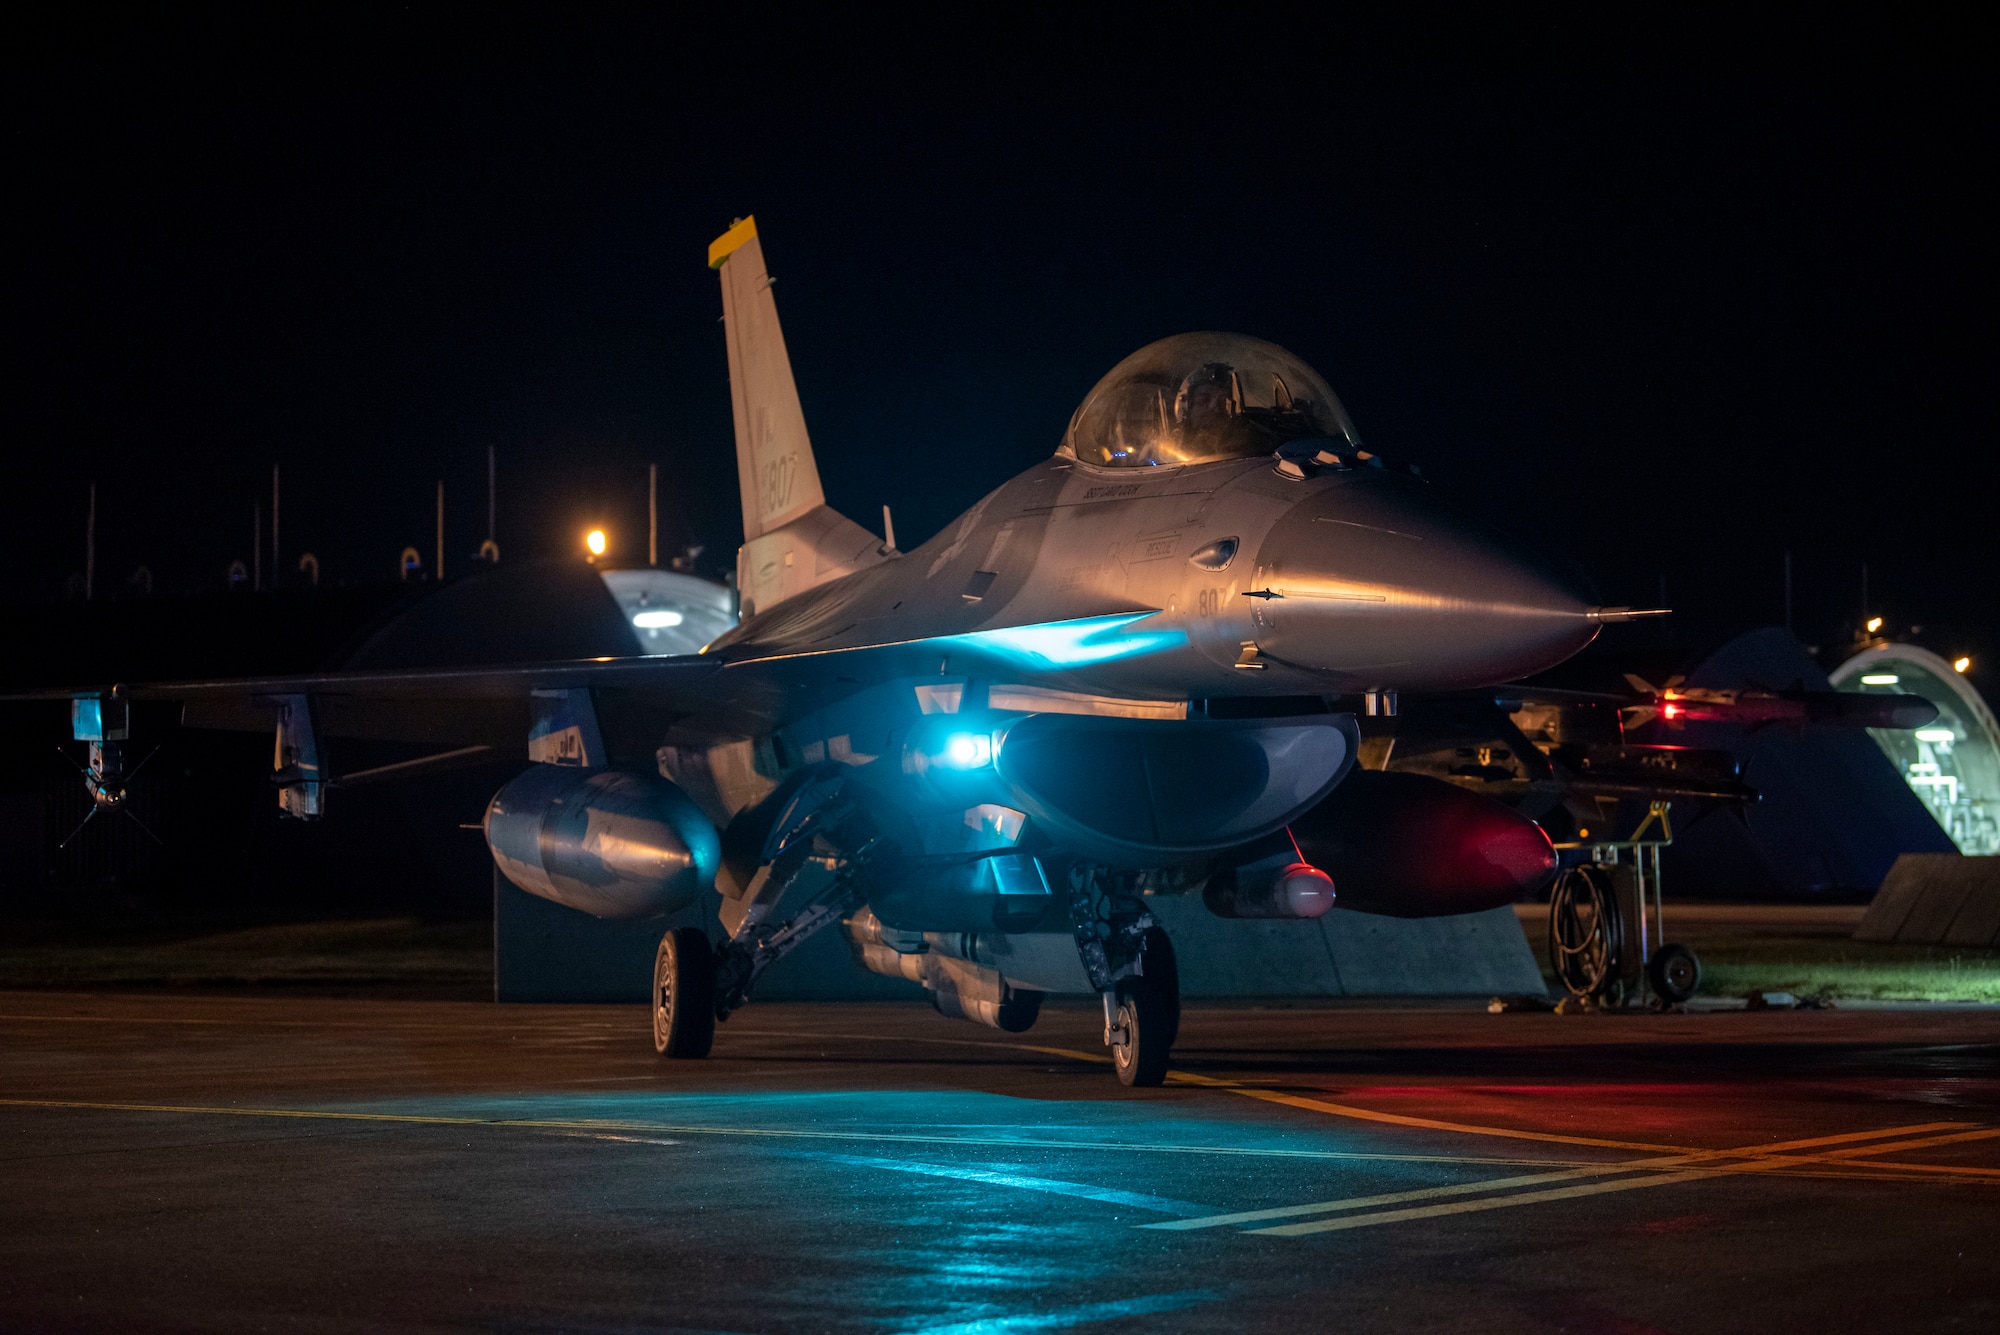 An F-16 Fighting Falcon sits on the runway at night.